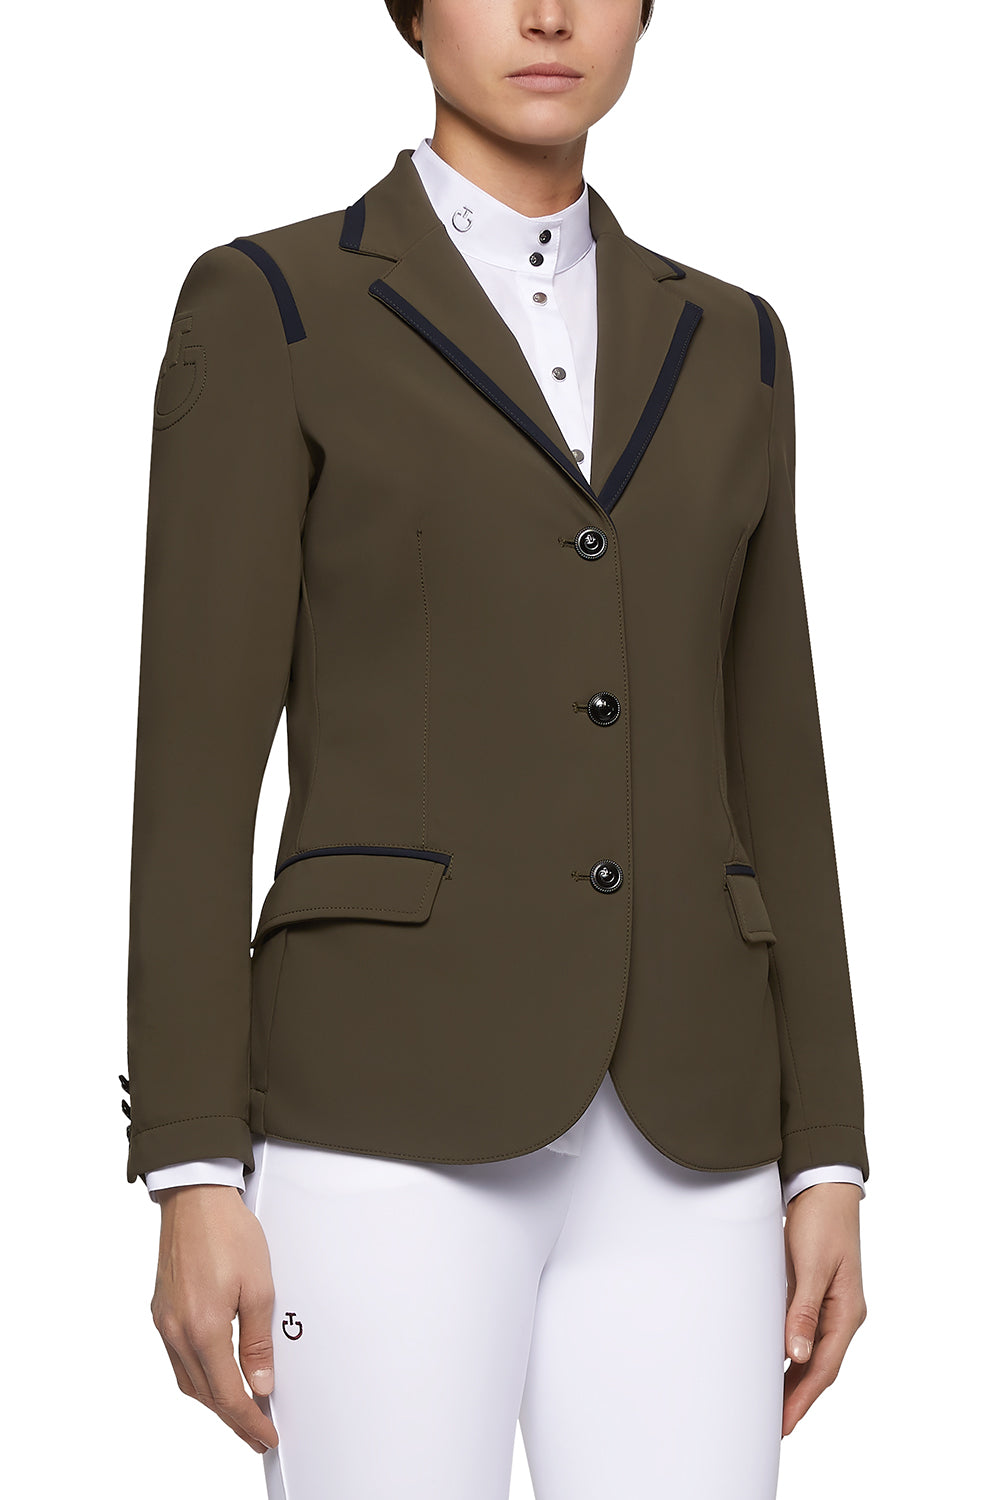 CAVALLERIA TOSCANA SHOW COAT WITH PIPING DETAIL